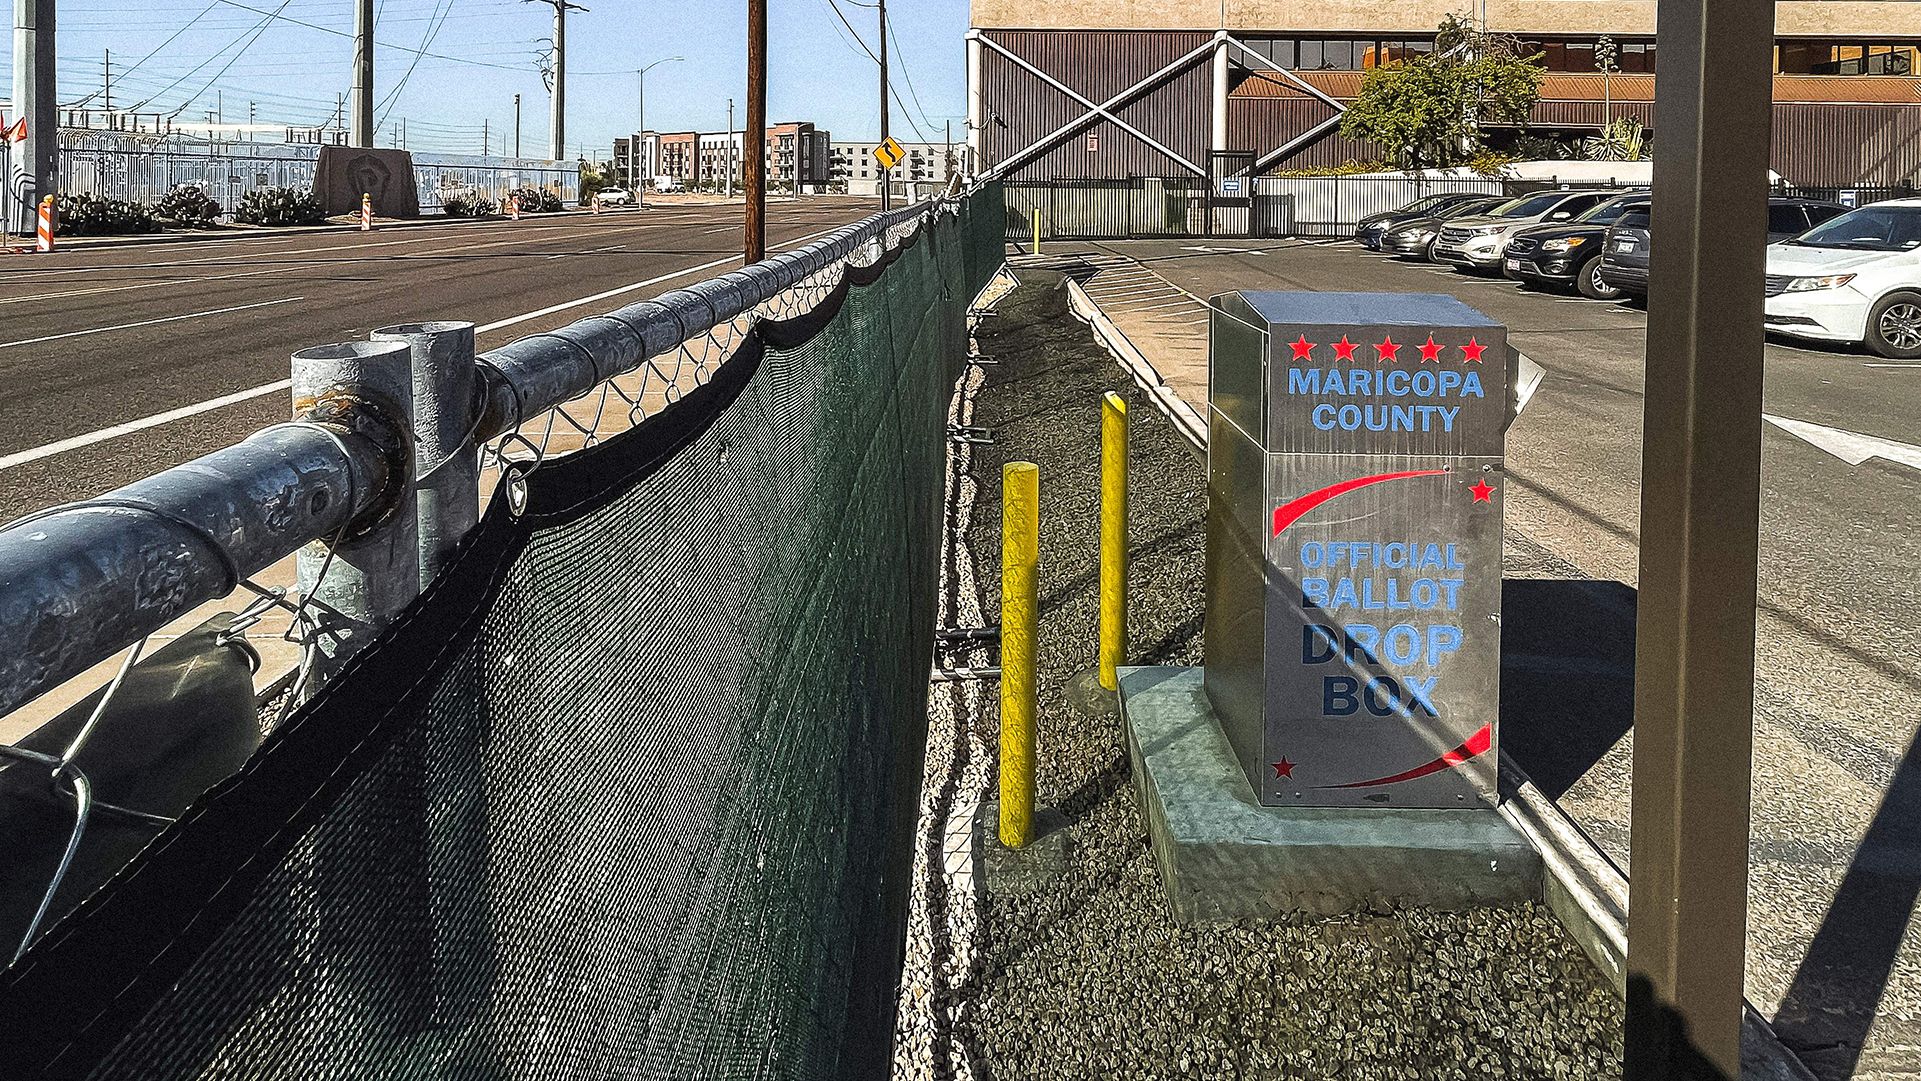 Fences surround the Maricopa County Tabulation and Elections Center in Phoenix on October 25, 2022.